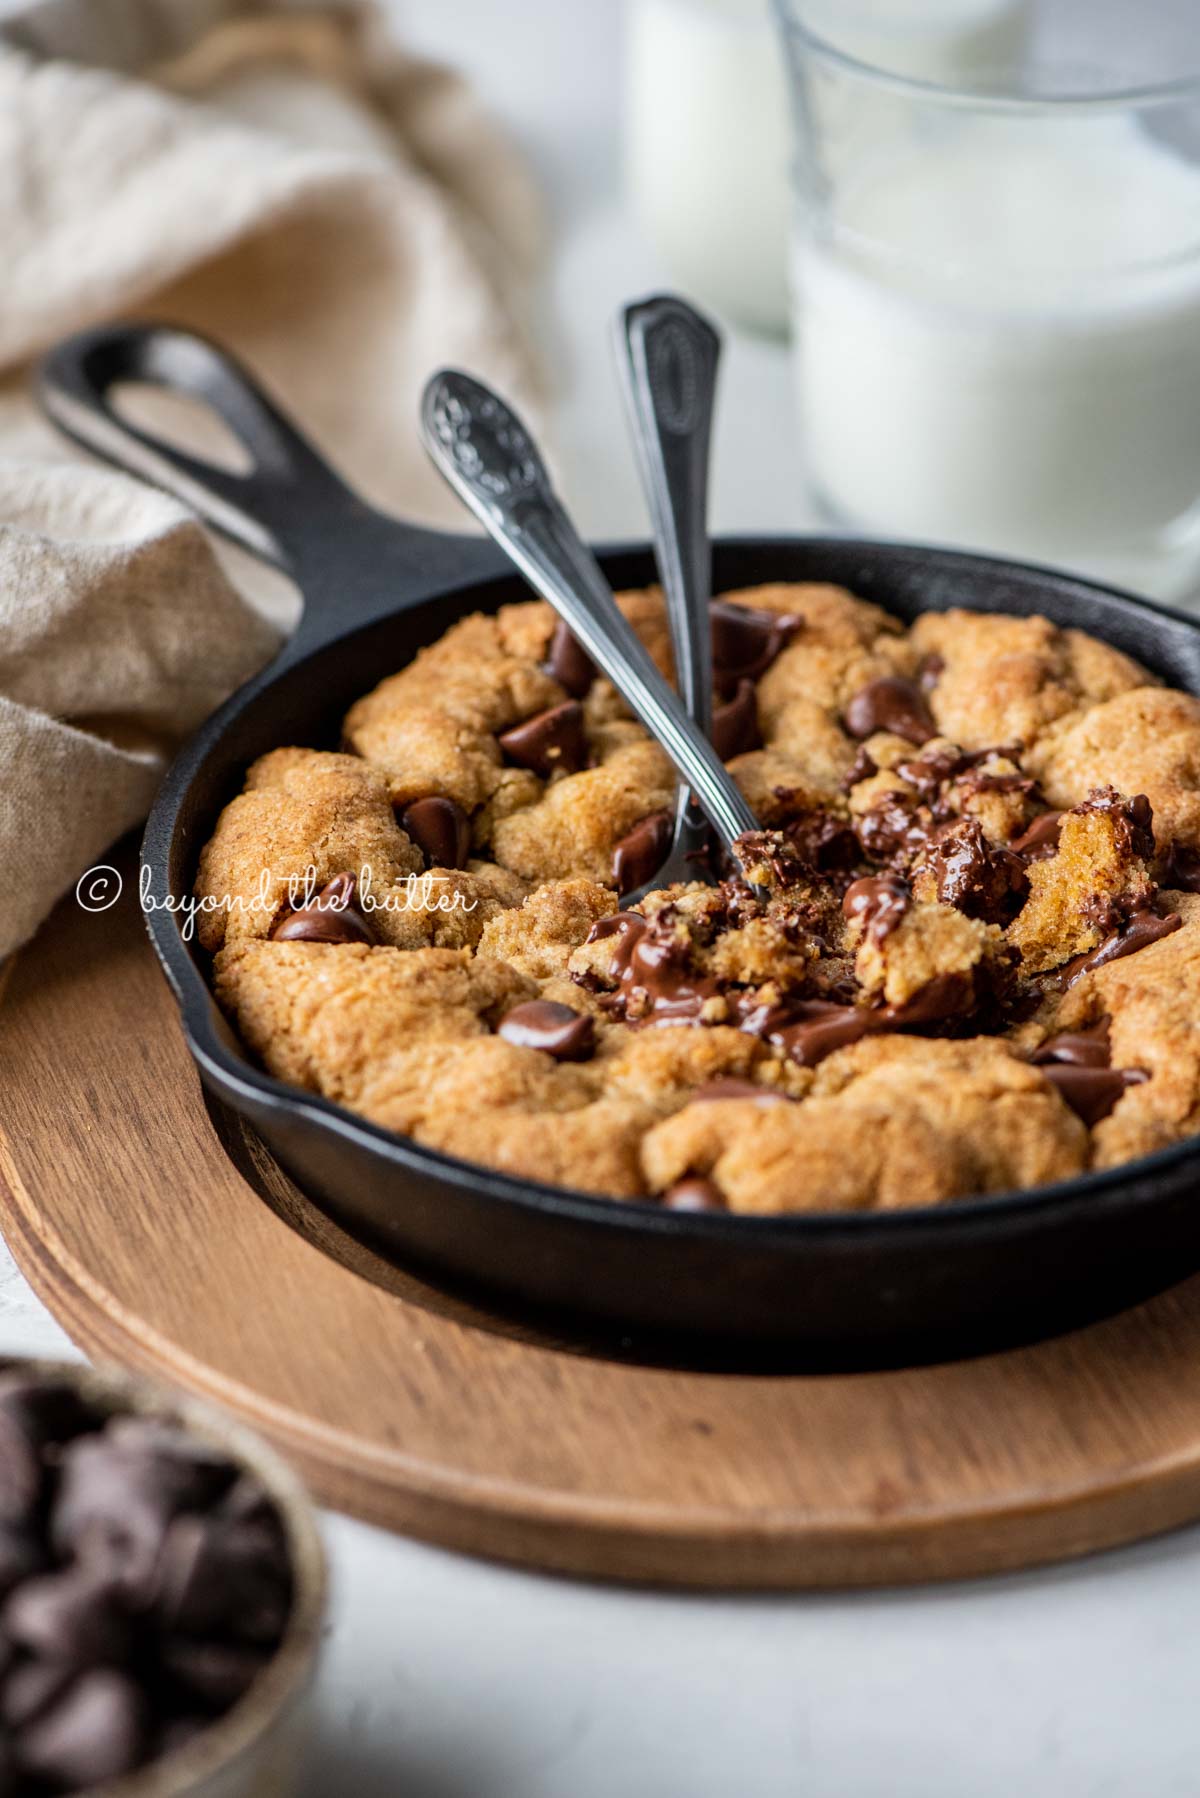 Warm brown butter chocolate chip skillet cookie with two spoons resting in skillet on wood trivet | All Images © Beyond the Butter®